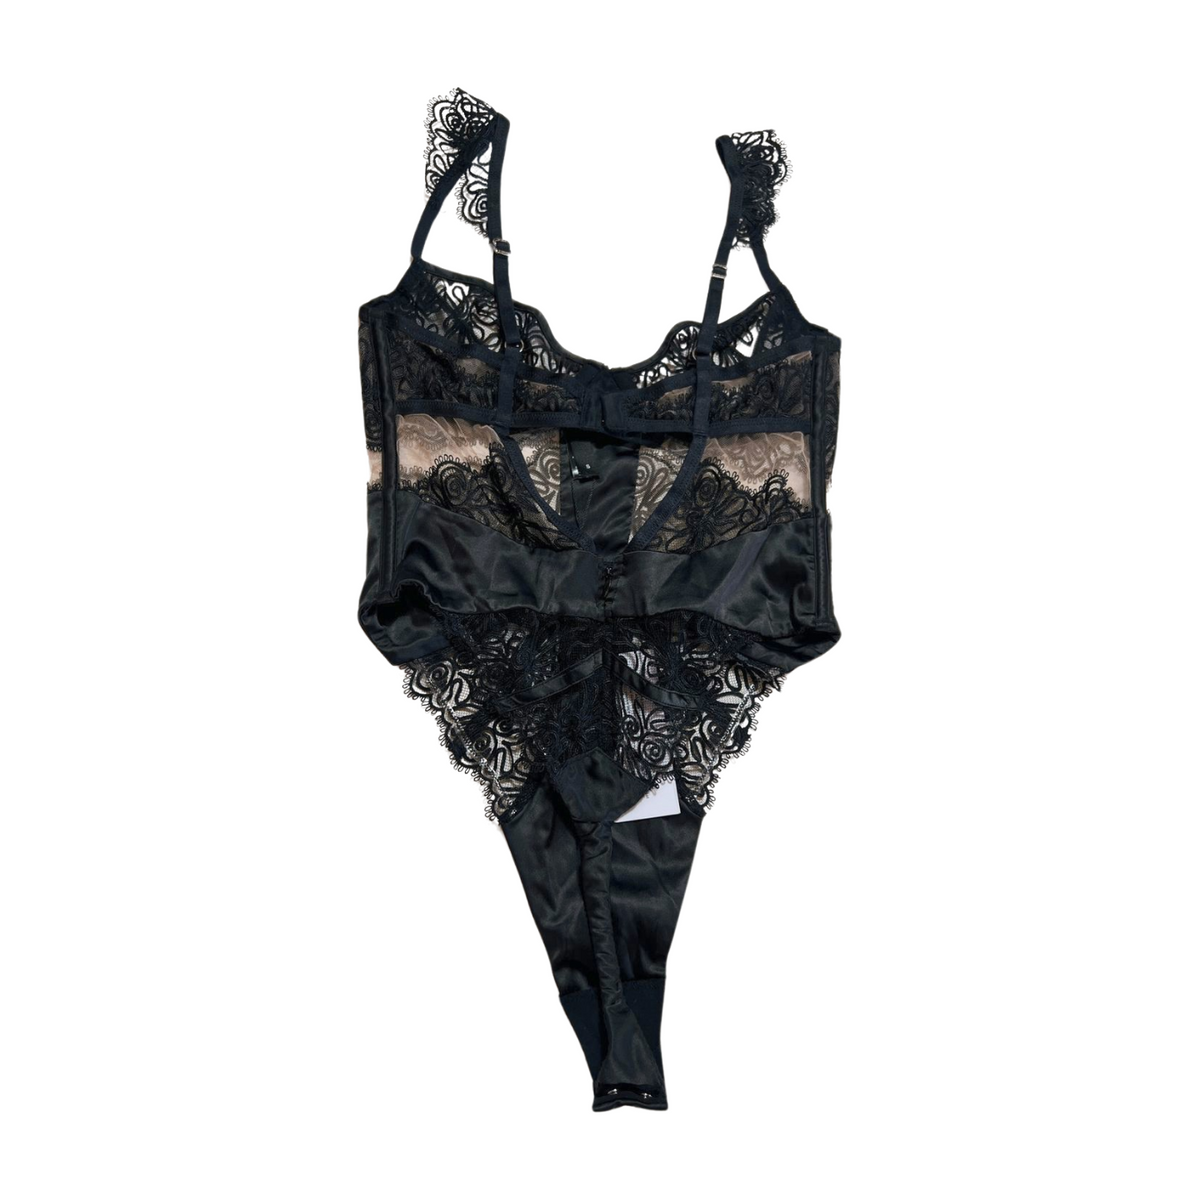 For Love and Lemons- Black Lace Bodysuit NEW WITH TAGS!